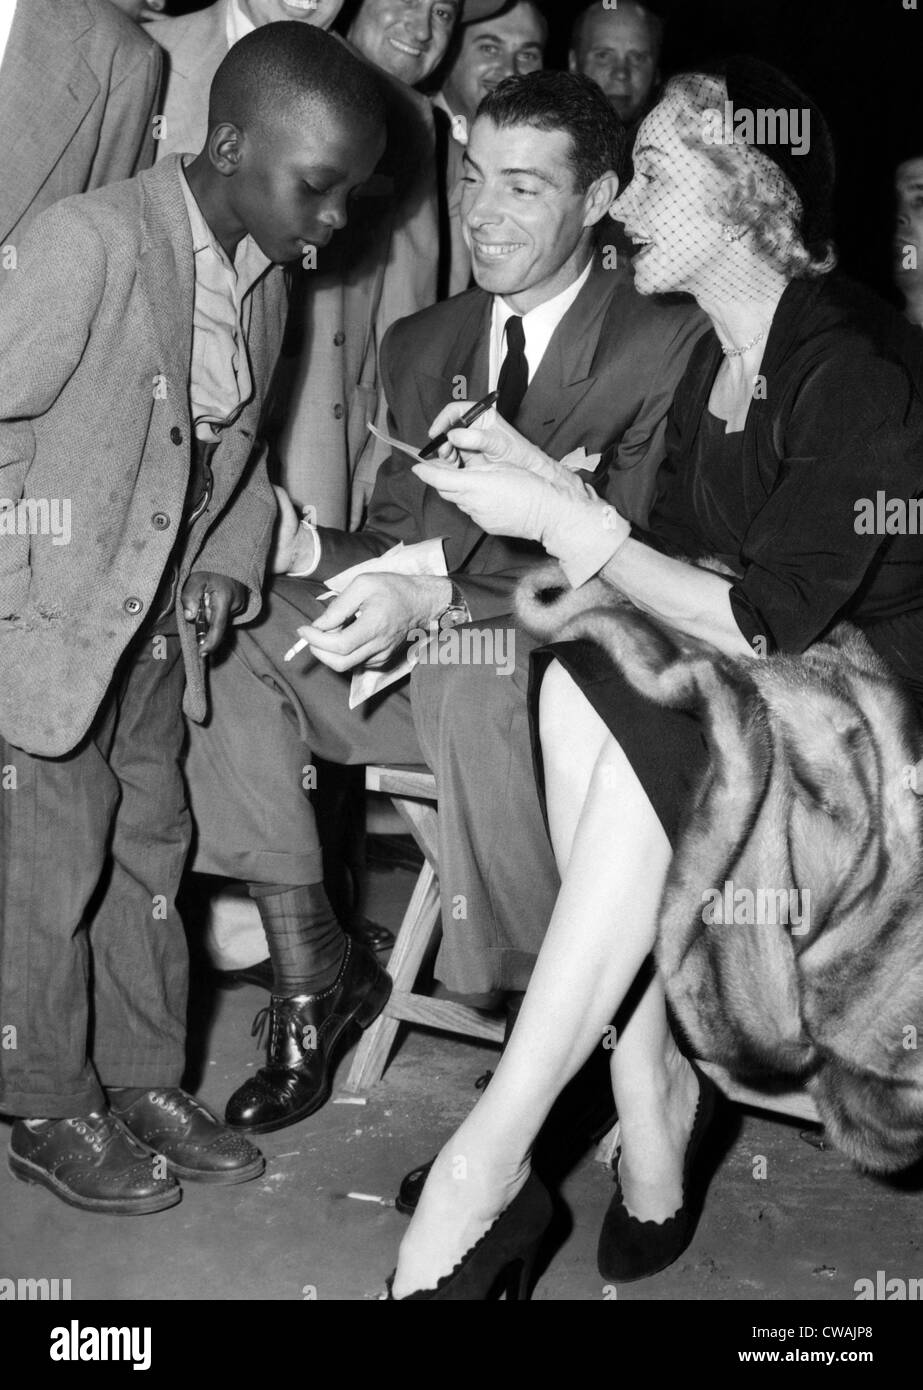 A young fan gets the autographs of Joe DiMaggio and Marlene Dietrich at a Sugar Ray Robinson fight in New York, 1951. Courtesy: Stock Photo